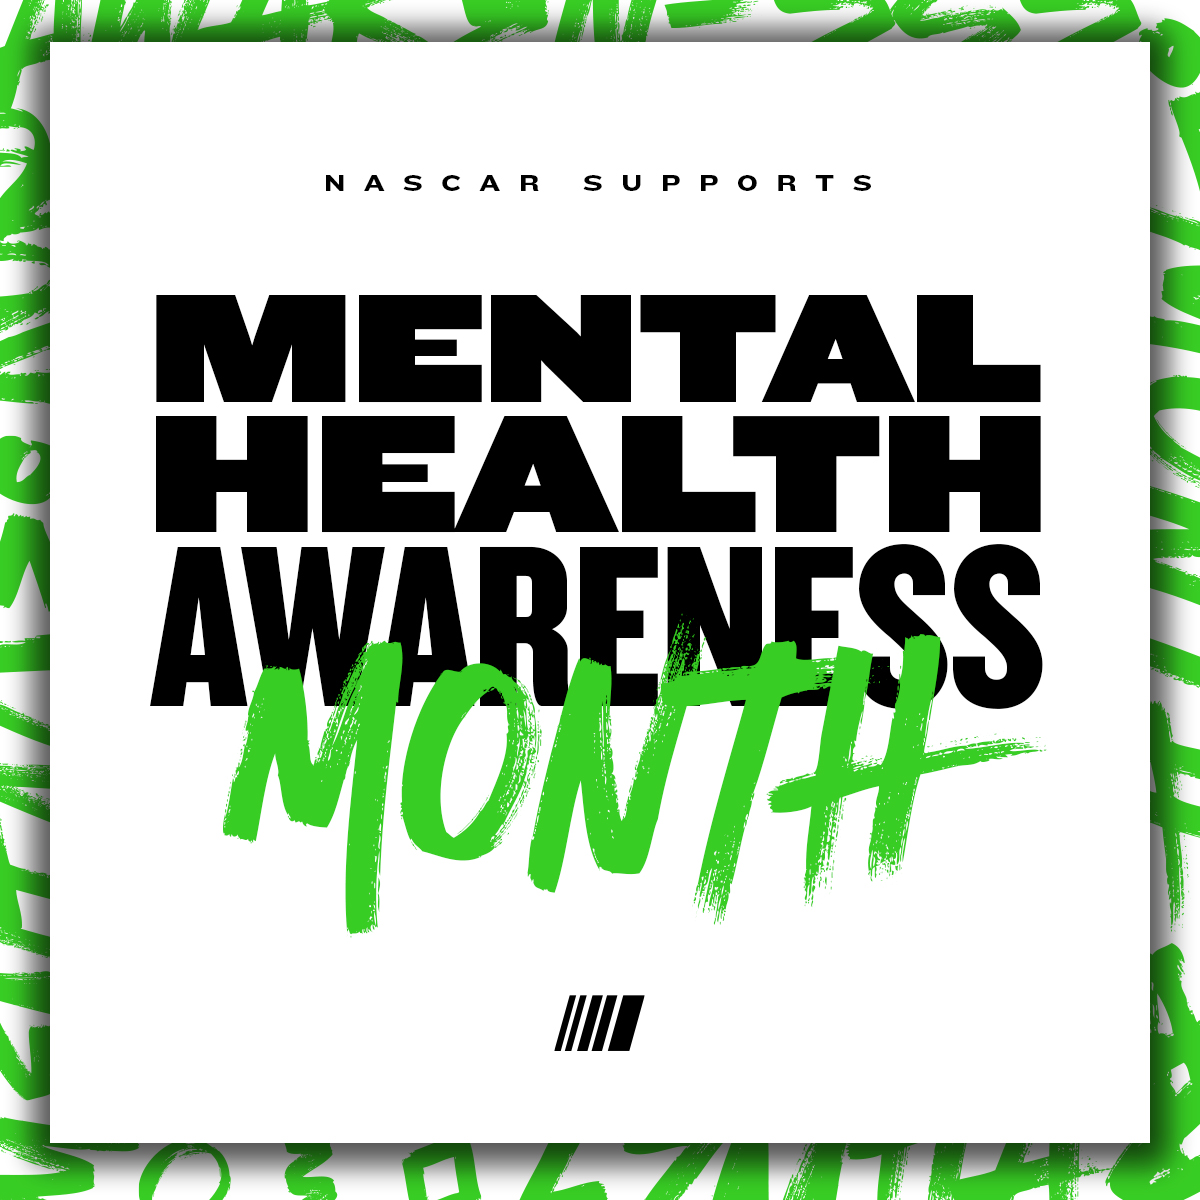 The month of May marks the start of Mental Health Awareness Month. Join us as we continue to have the important conversations surrounding mental health. #MentalHealthAwarenessMonth